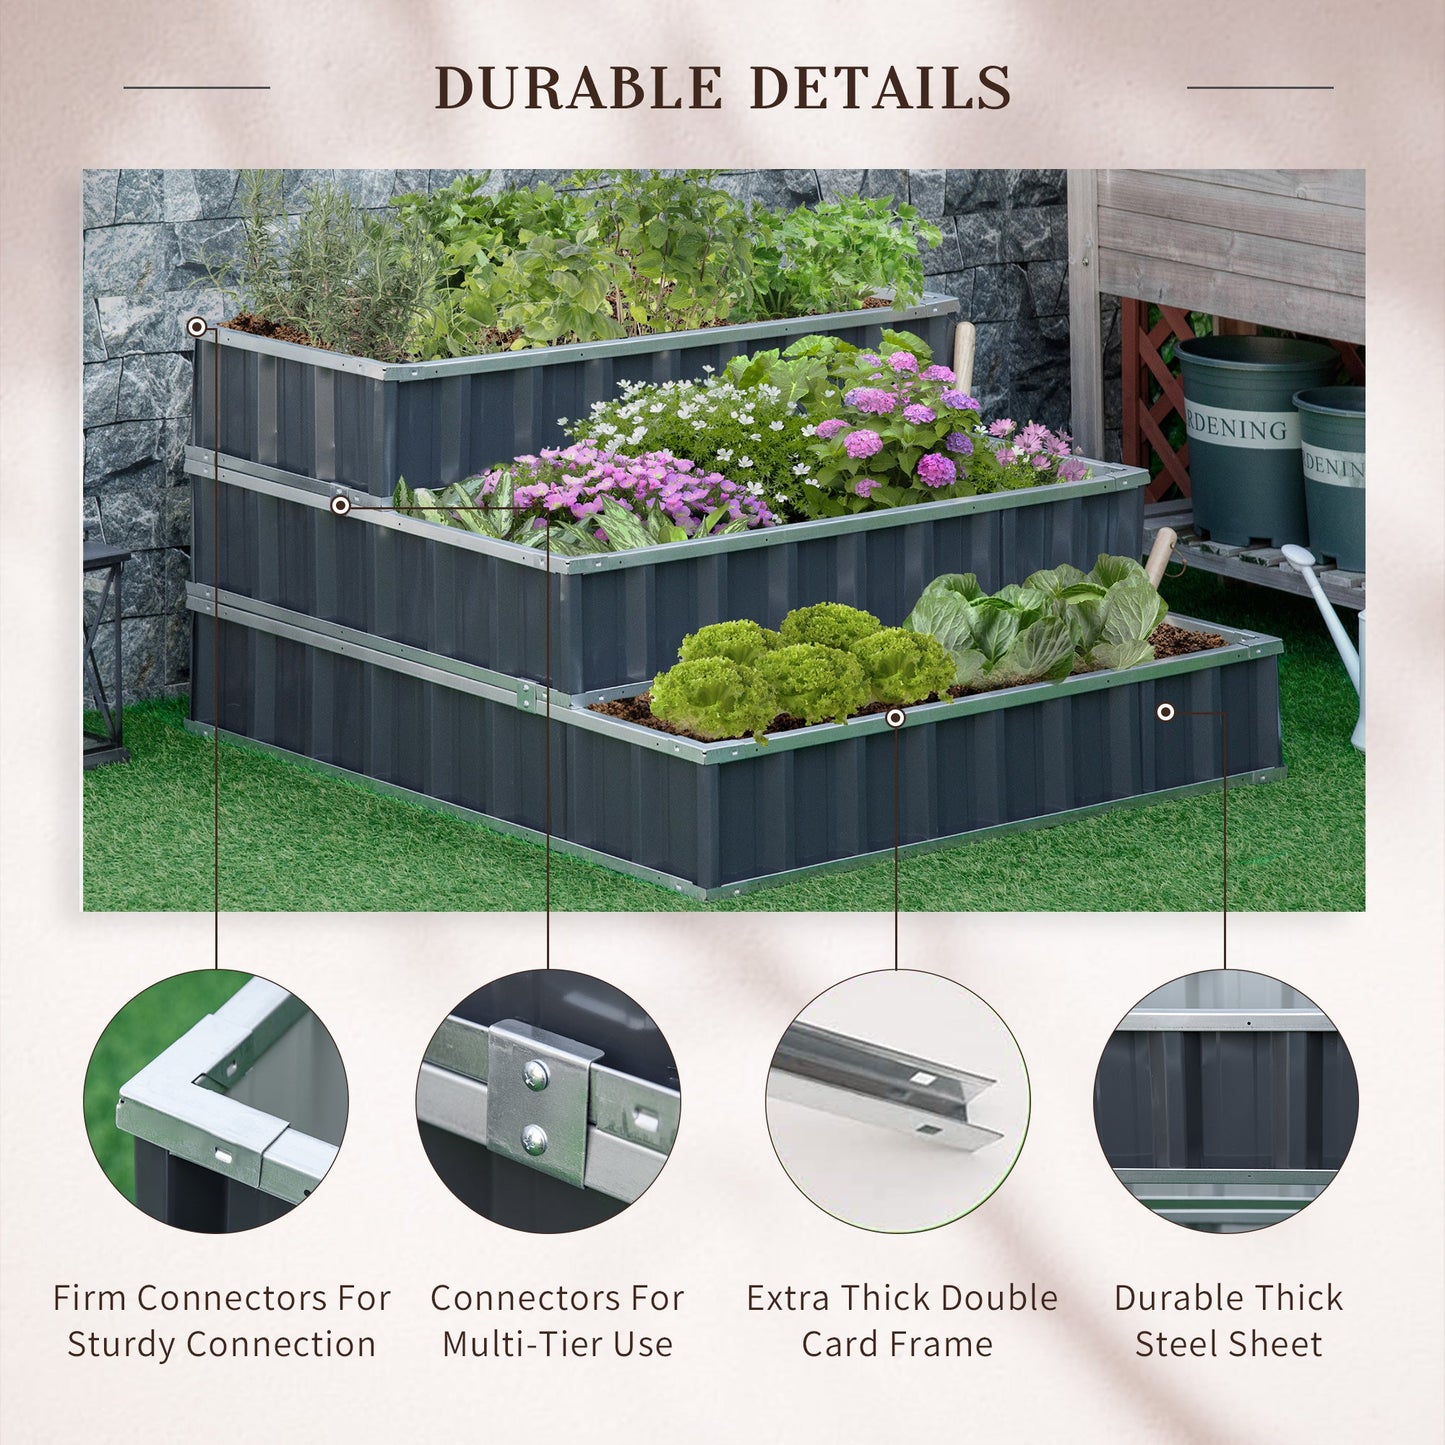 -Outsunny 47" x47" x25" 3 Tier Raised Garden Bed, Metal Elevated Planer Box Kit w/ A Pairs of Glove for Backyard, Patio to Grow Vegetables, Herbs - Outdoor Style Company